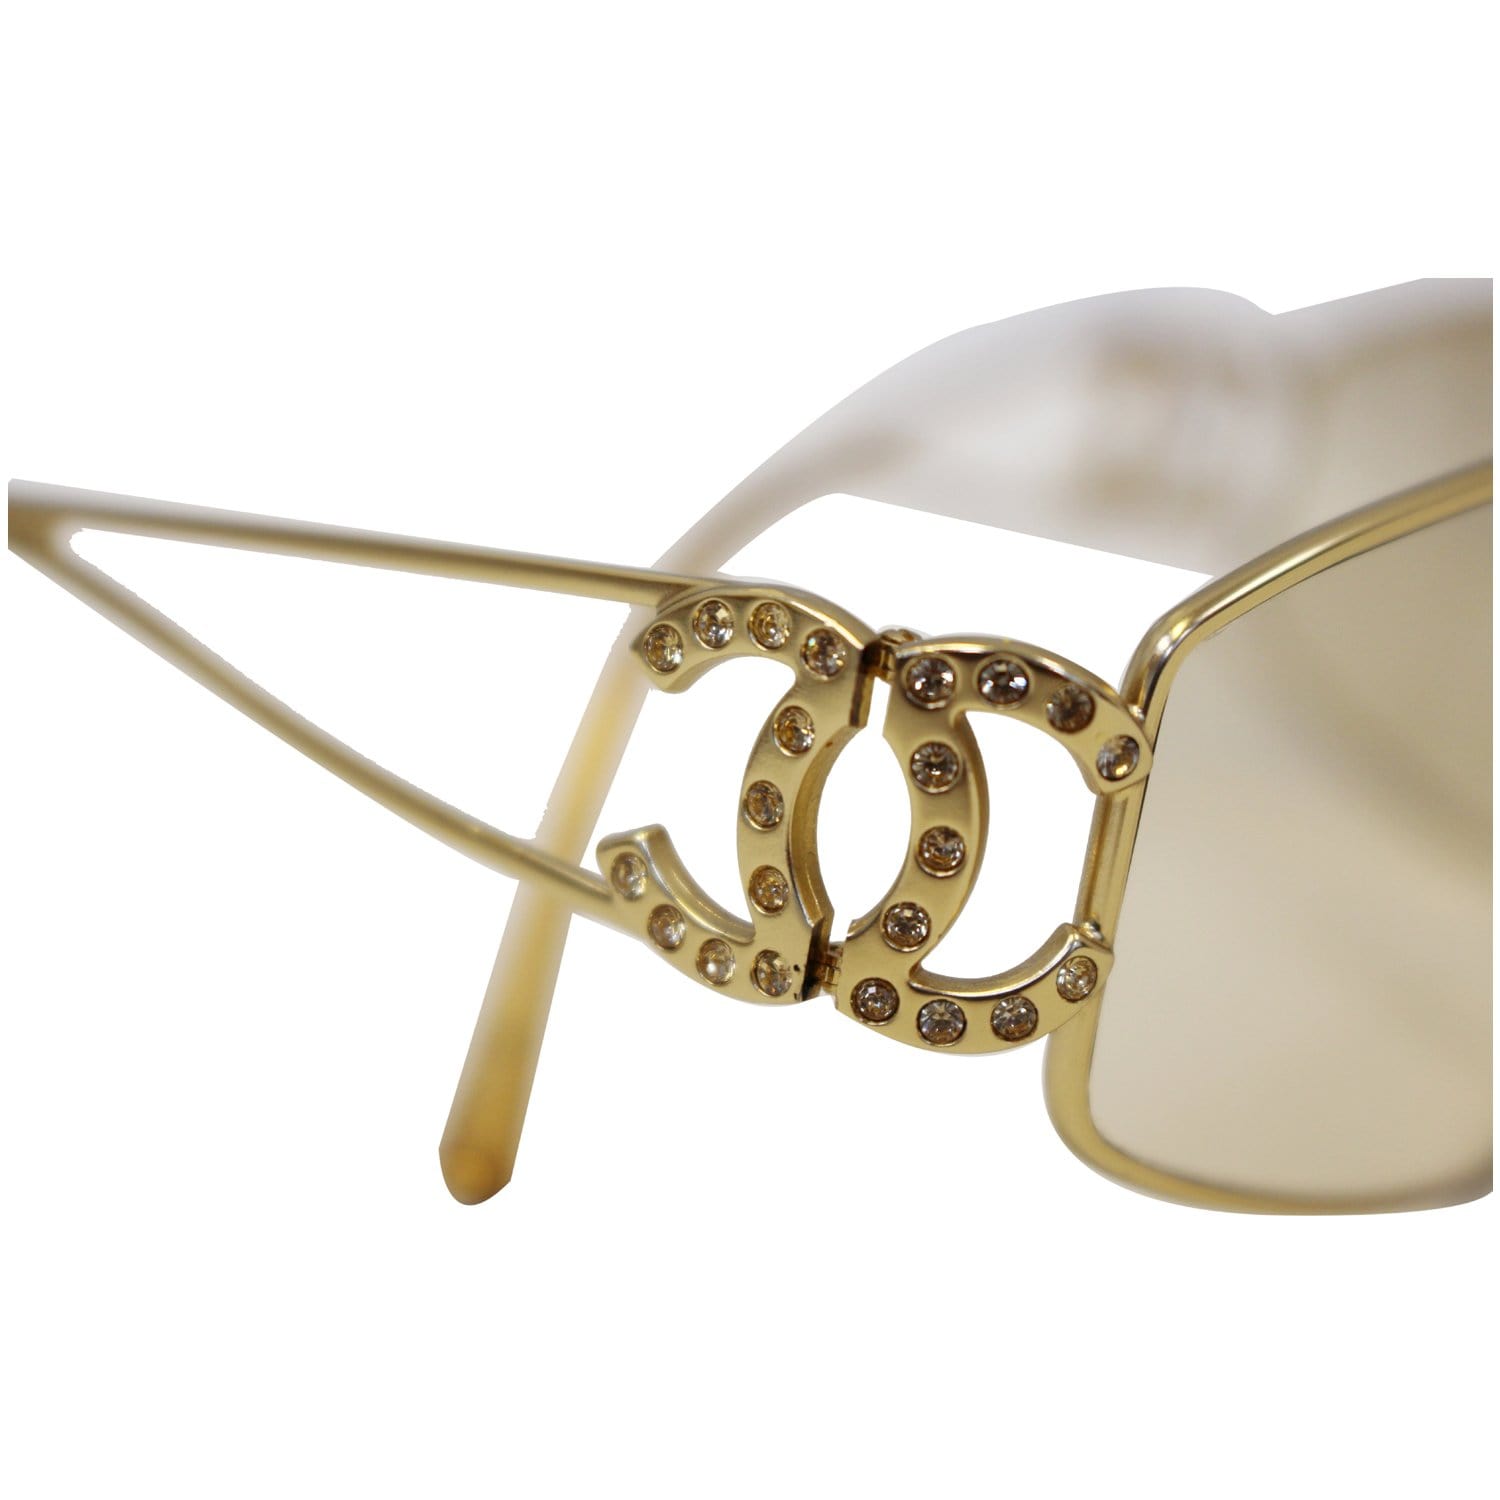 Chanel Sunglasses 4095-B Yellow Gold￼￼ Swarovski Crystal ￼SOLD OUT! Needs  Lenses